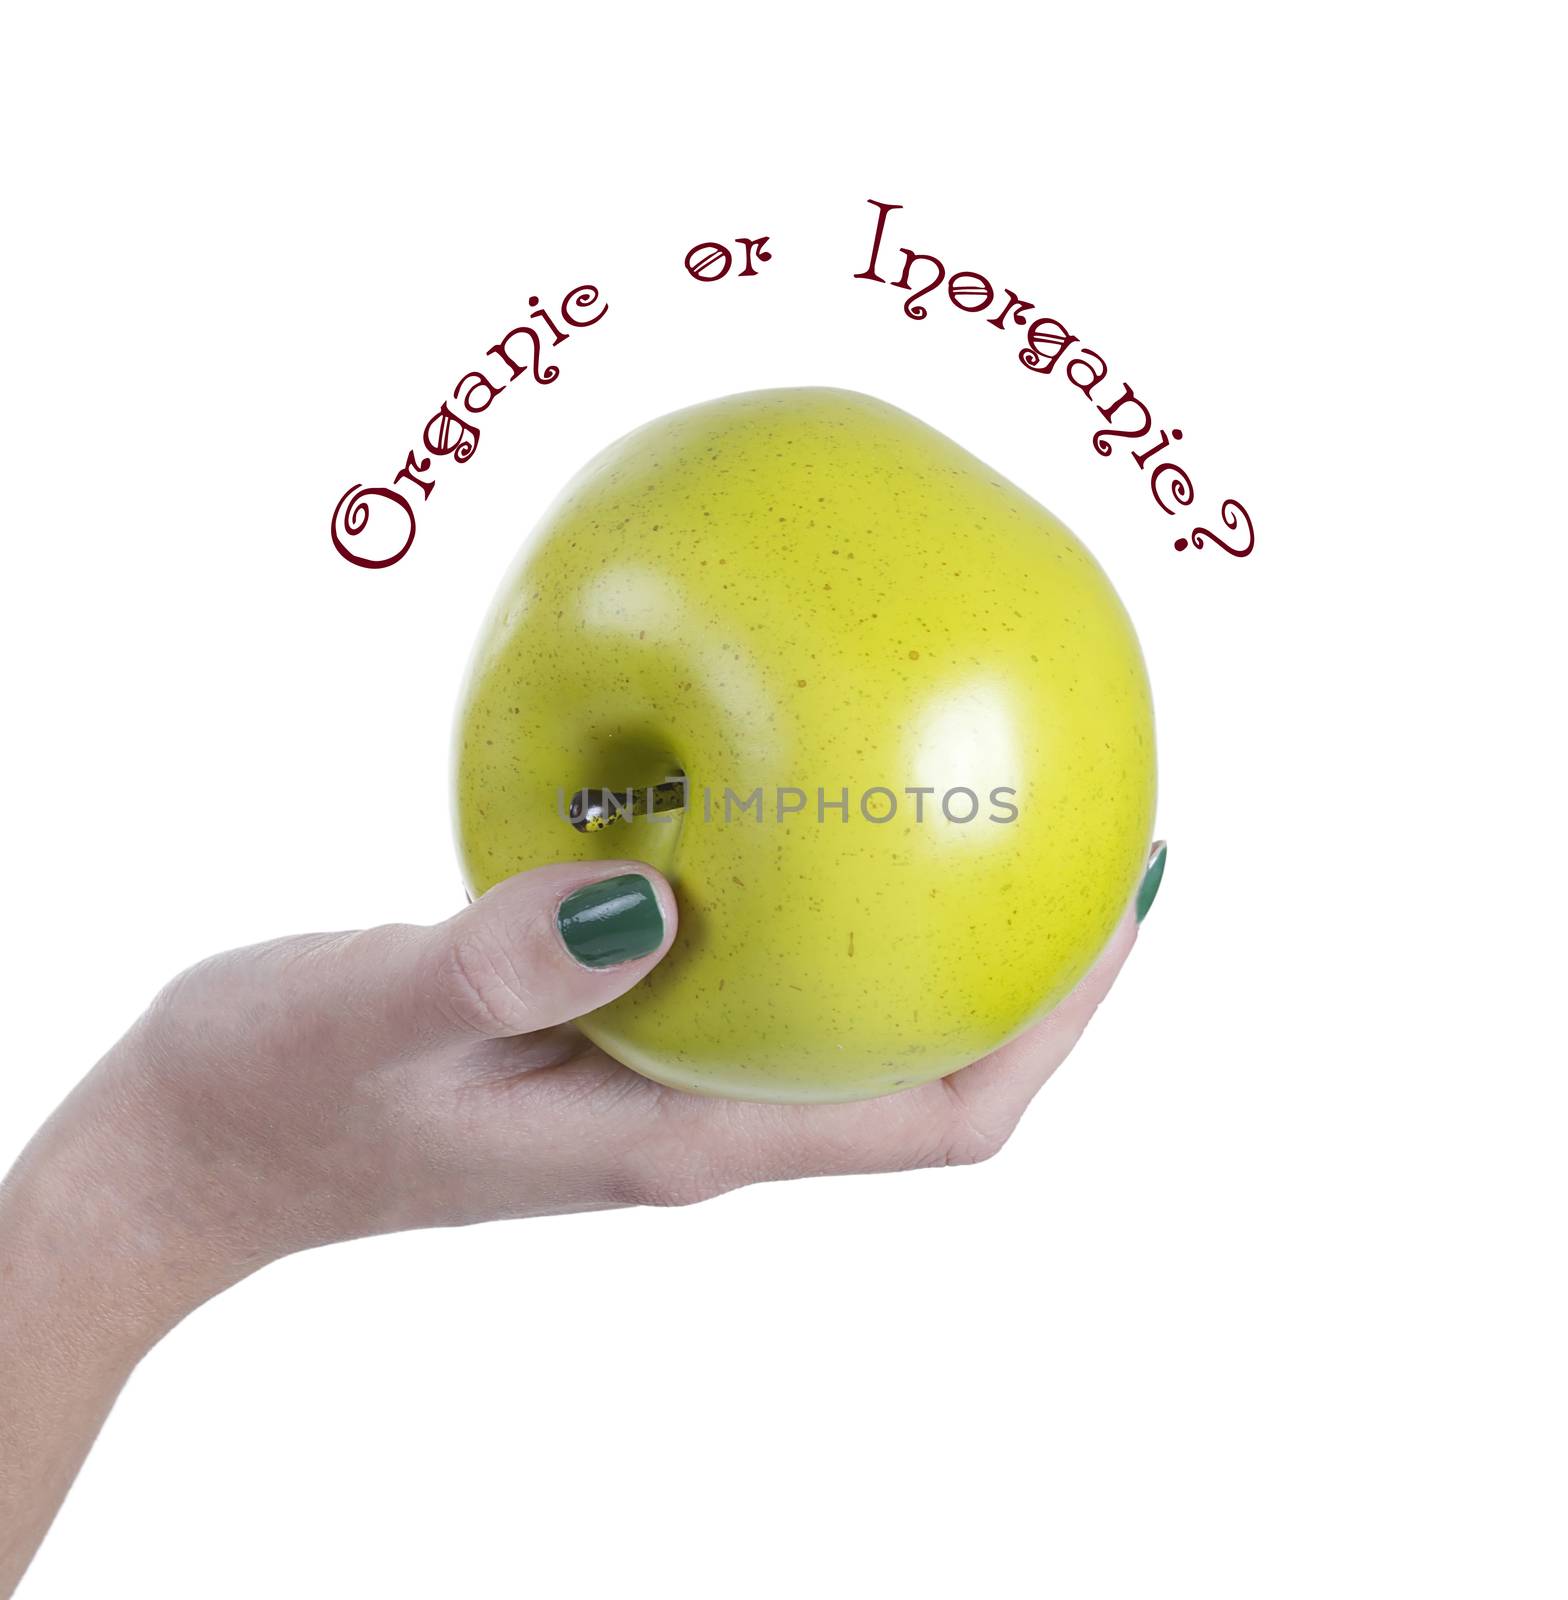 Green apple in his hand and asks Organic or inorganic?